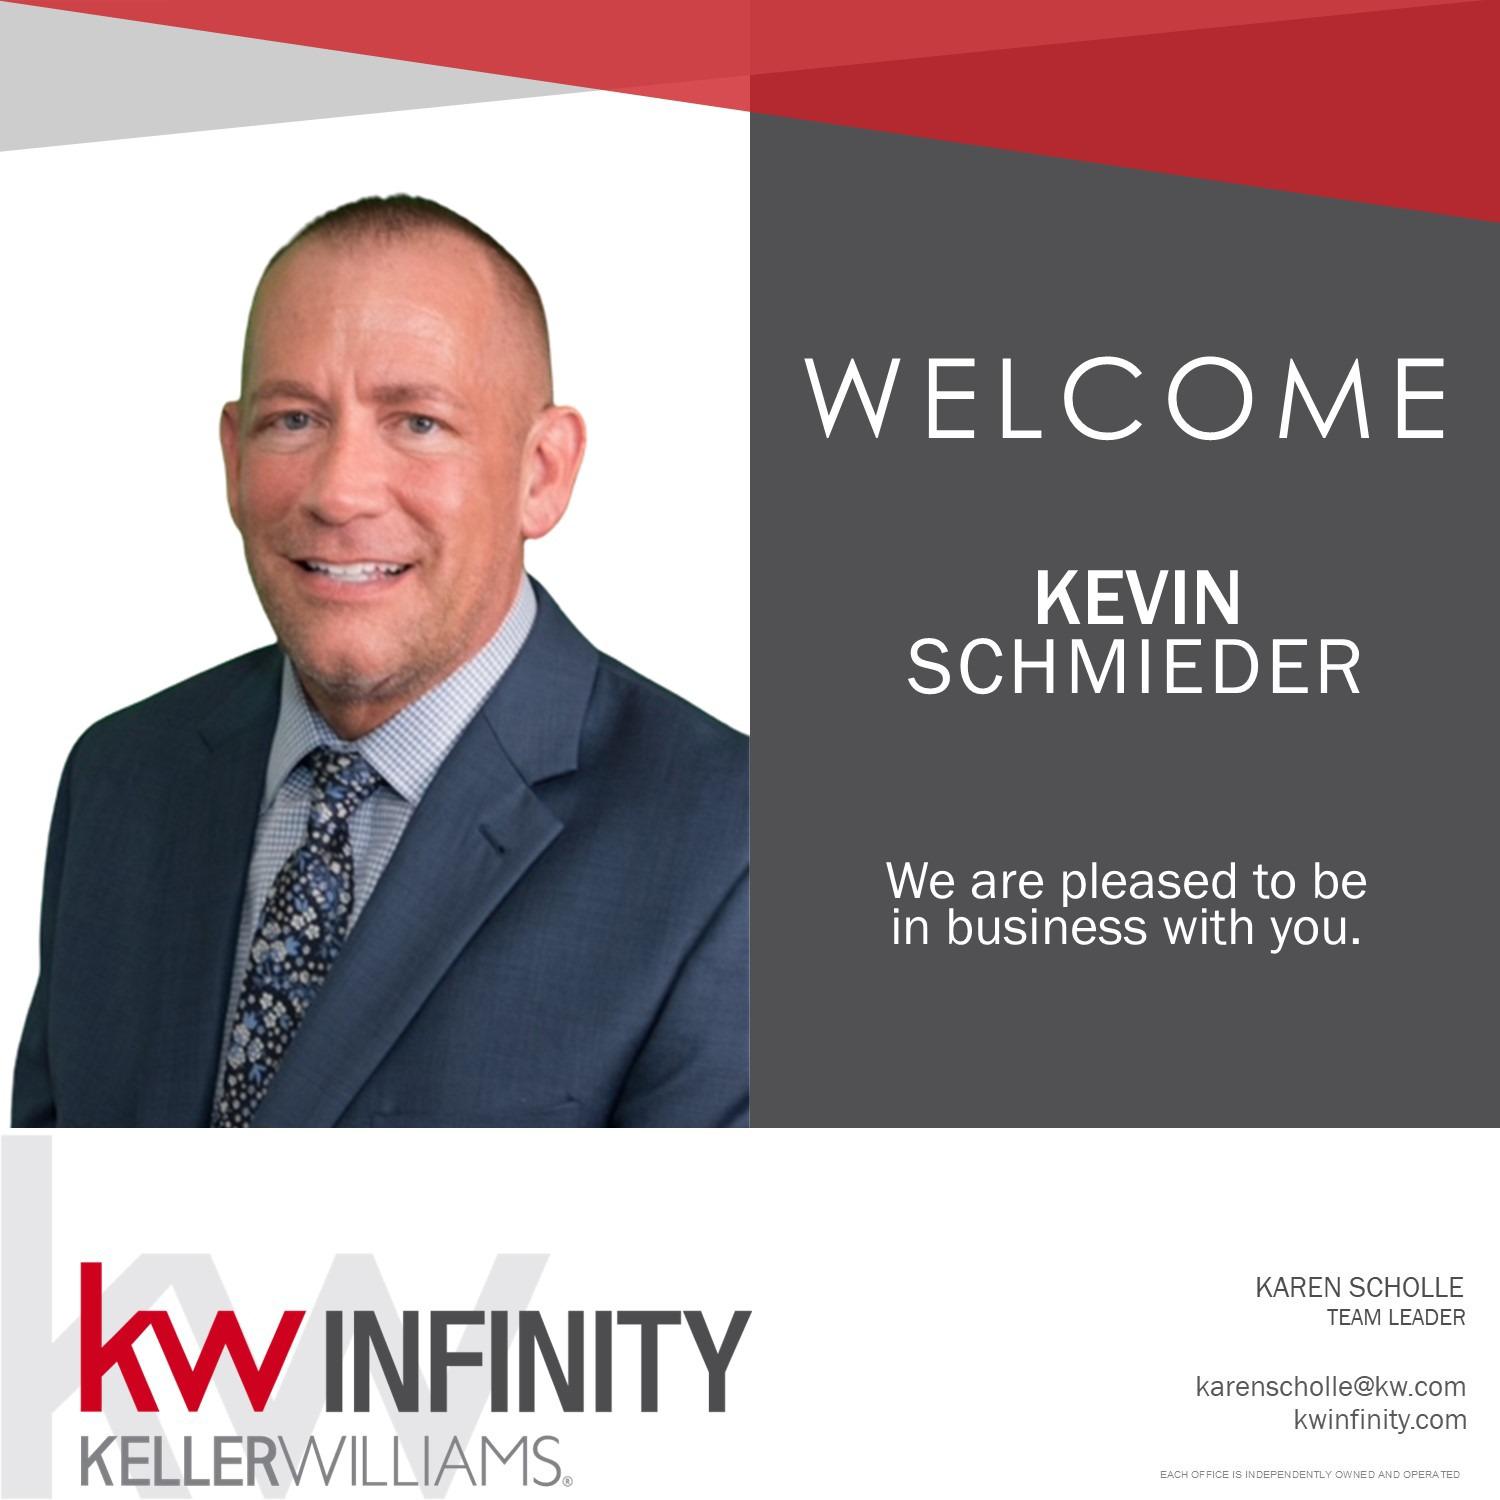 Meet Kevin, Nothing provides me with greater satisfaction than helping my clients. I realized very early on in this industry that happy clients are what make me happy! I realize that you need a real estate professional that will listen to you, understands the industry, and is positioned to stay ahead of the game. - When you are thinking of buying or selling a property call us at 630-333-2798. We make it simple because we care. The Giovanna Group-Keller Williams Infinity Group 105 E Spring St. Yorkville, IL 60560.